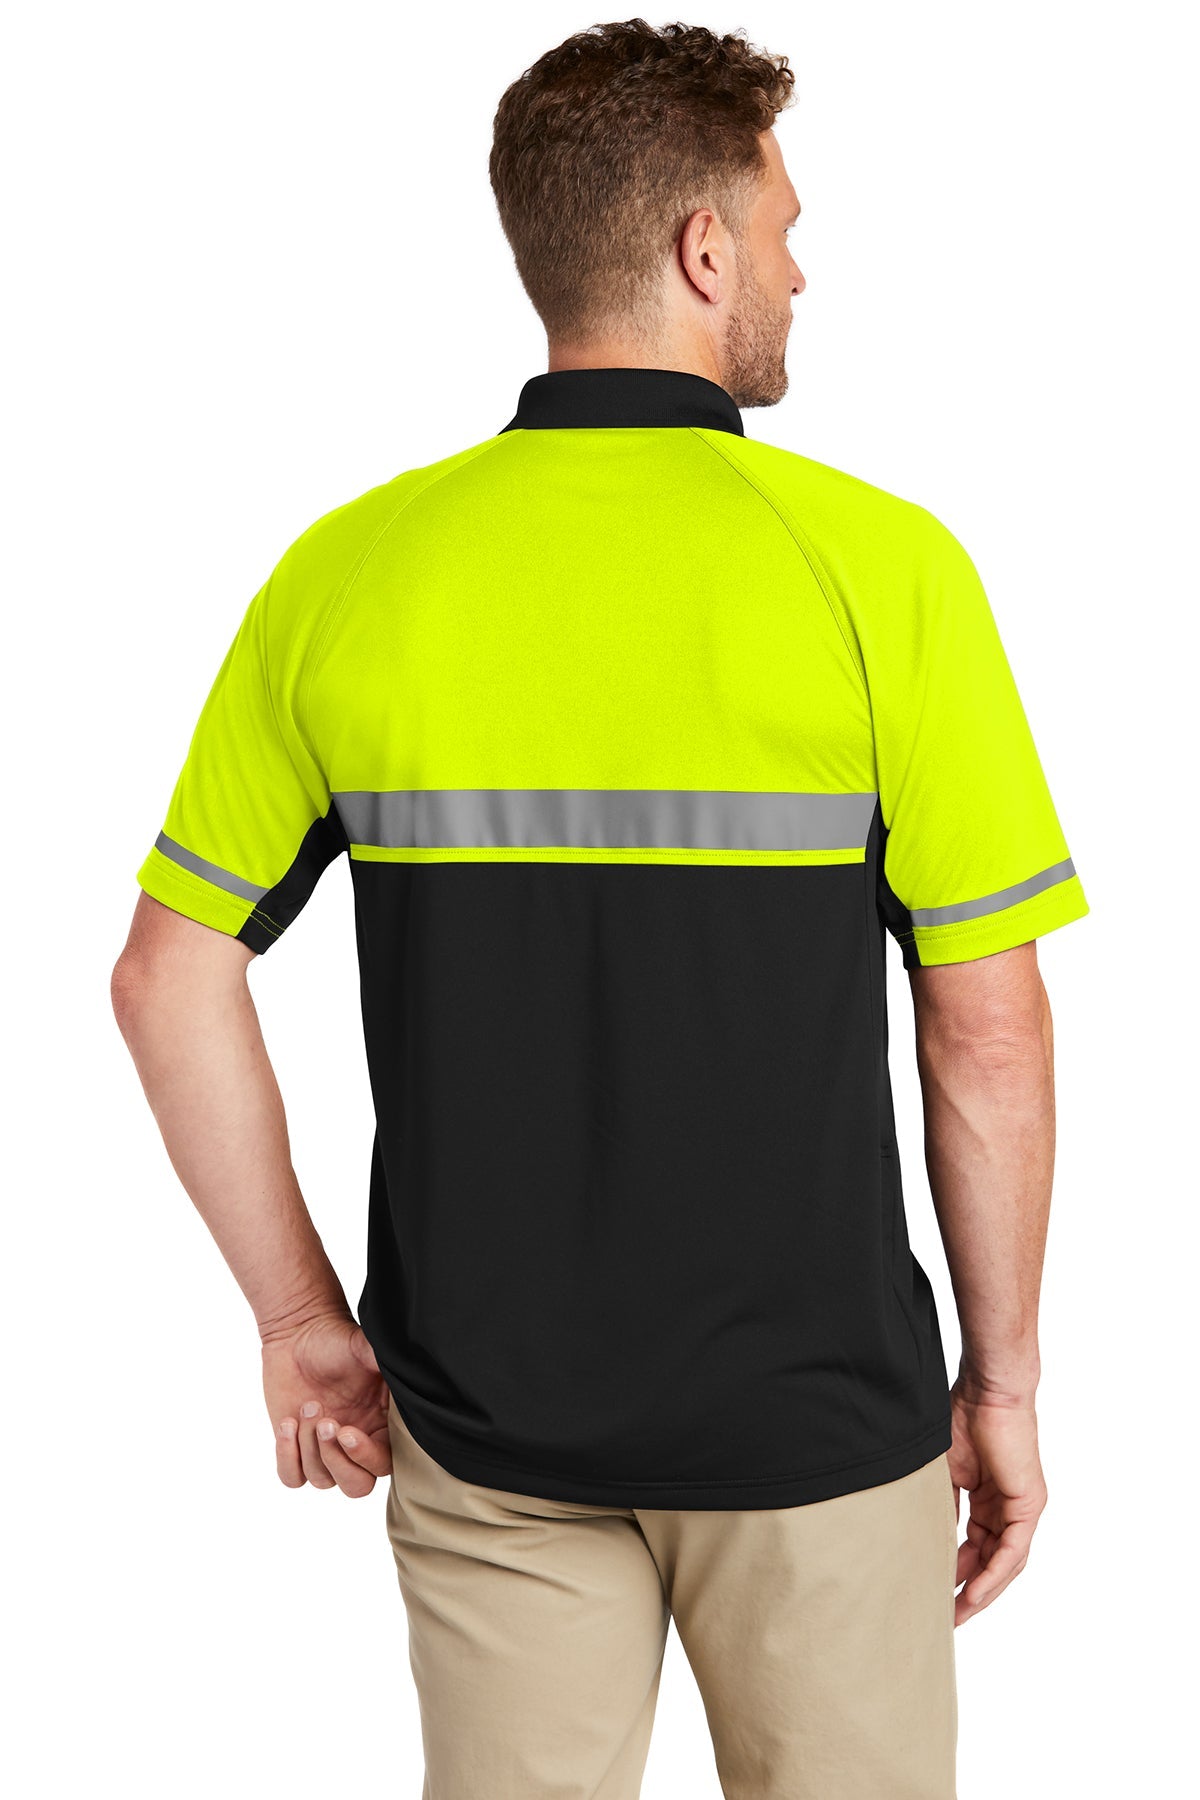 CornerStone Select Lightweight Snag-Proof Enhanced Visibility Polo CS423 Safety Yellow/ Black